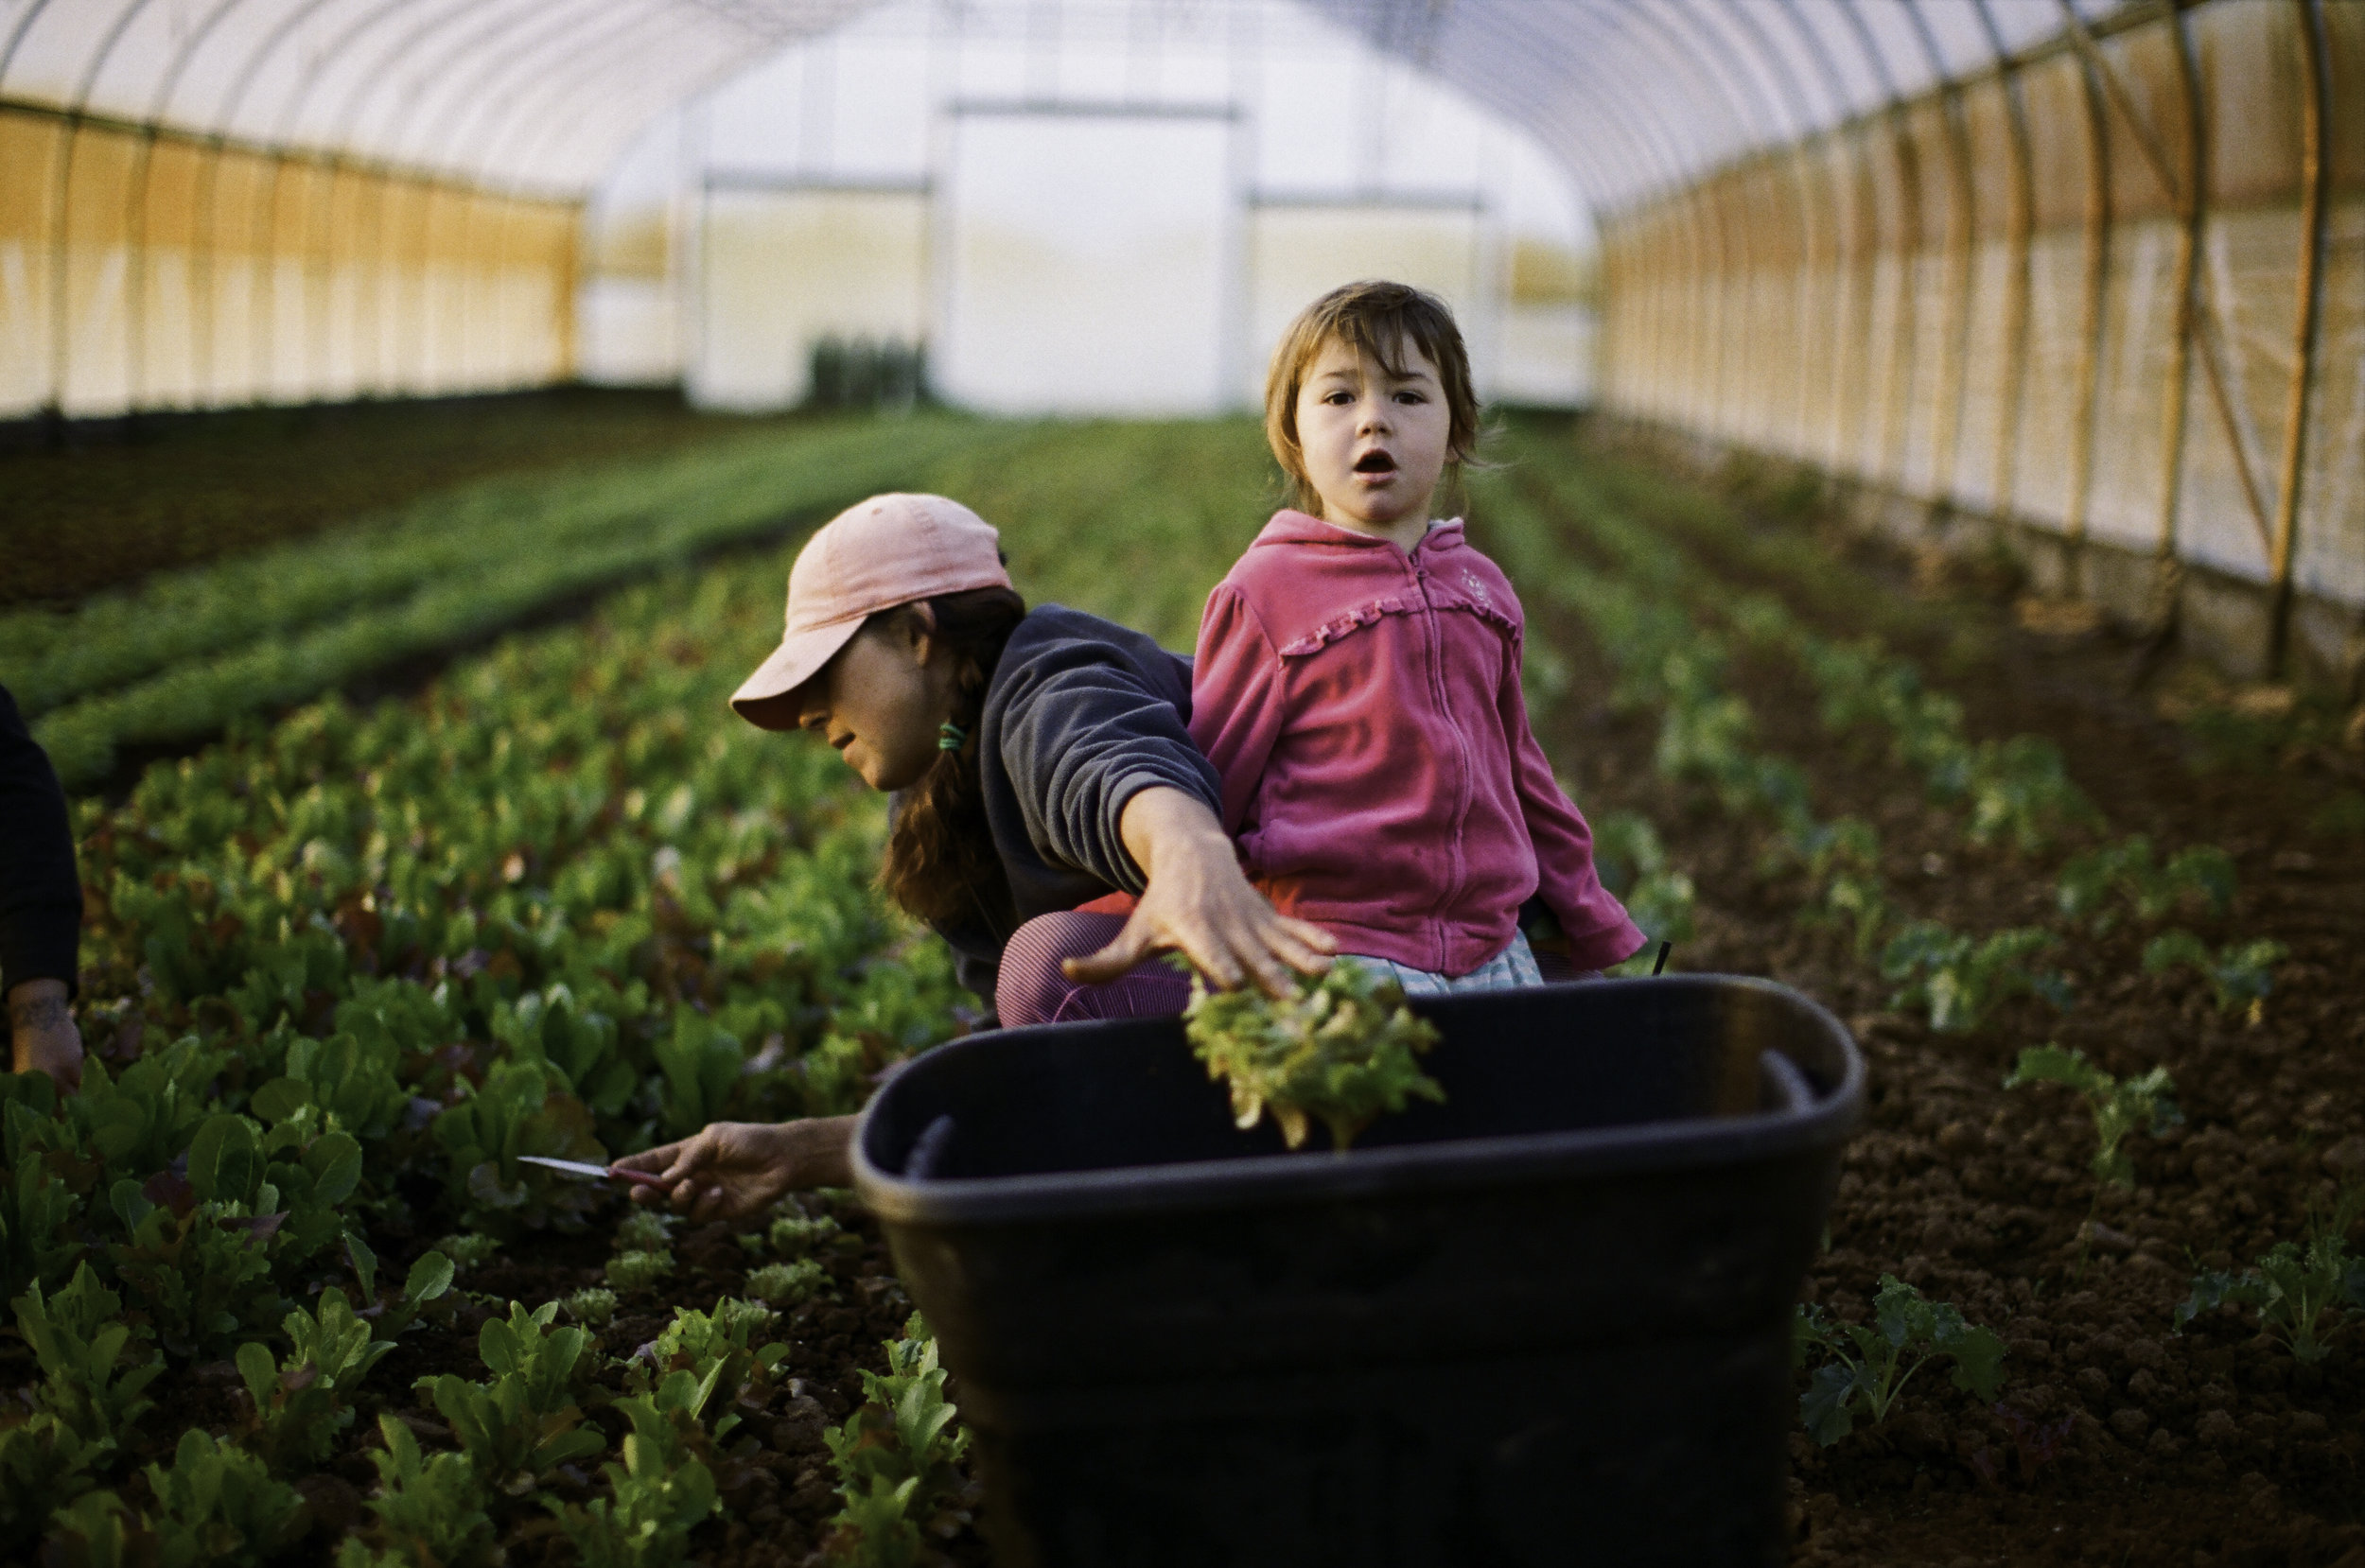  Sunshine and her youngest daughter, Natasha, in a high tunnel harvesting baby lettuce. Their day typically starts at 6:30 AM and goes until 7 to 8 PM. 